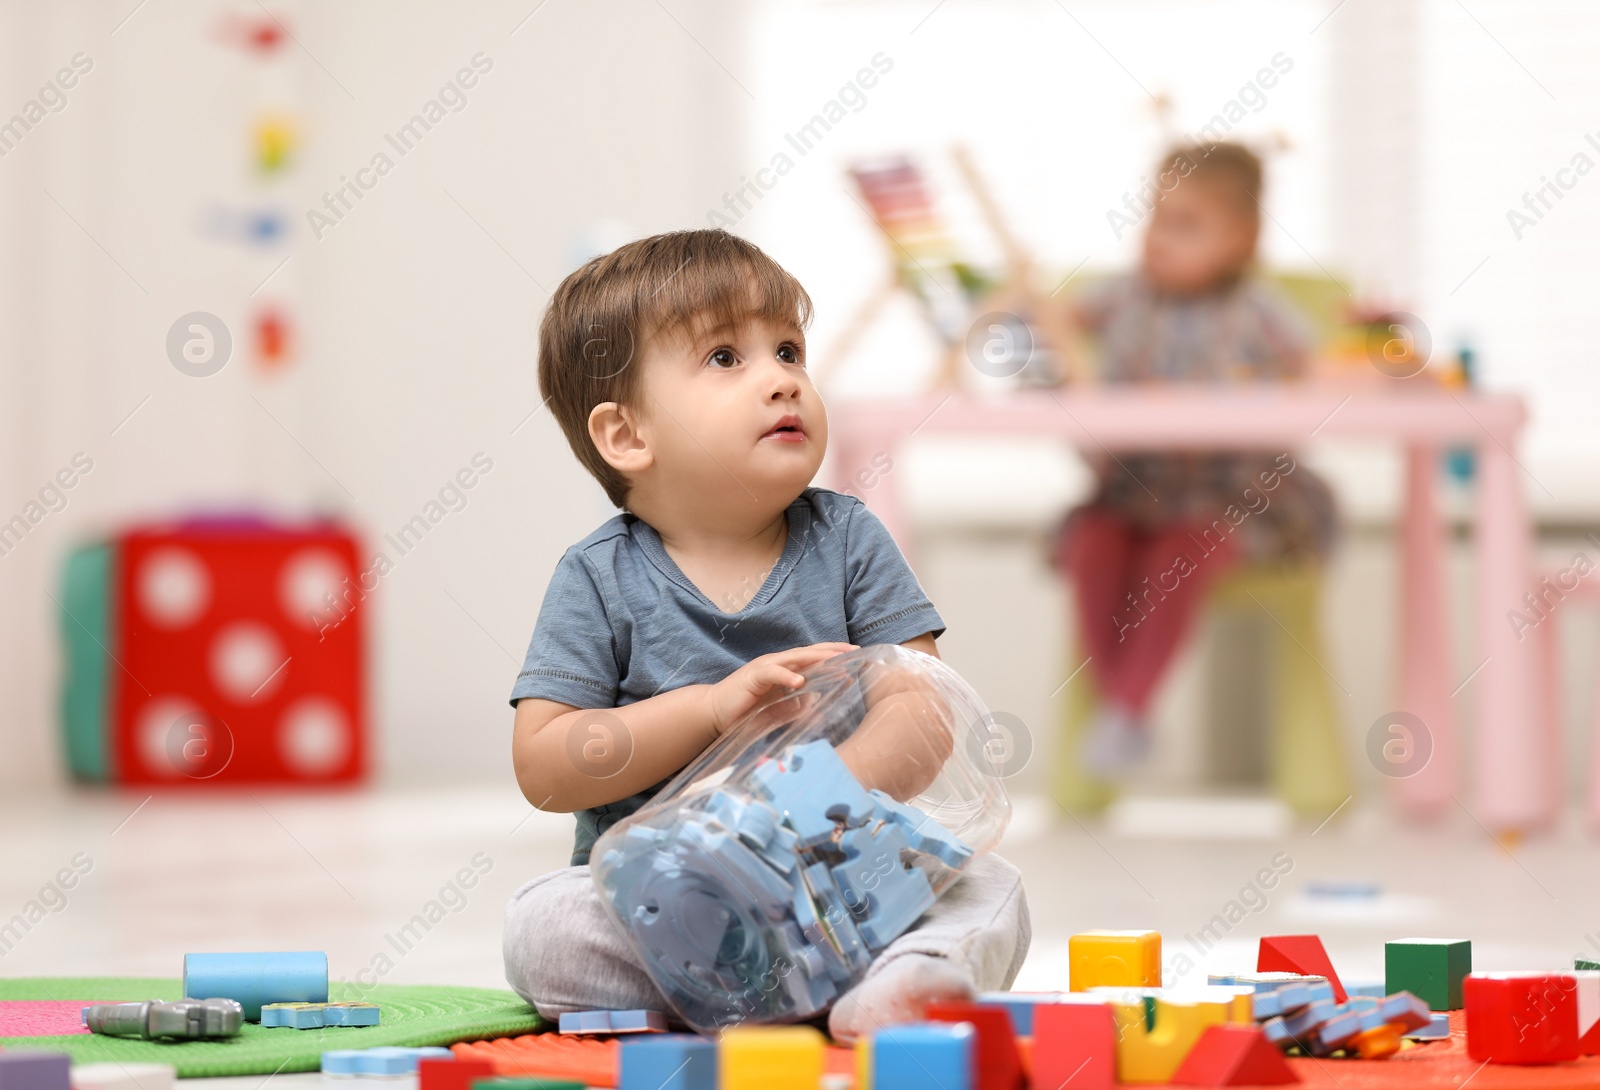 Photo of Cute little child playing with jigsaw puzzles on floor at home